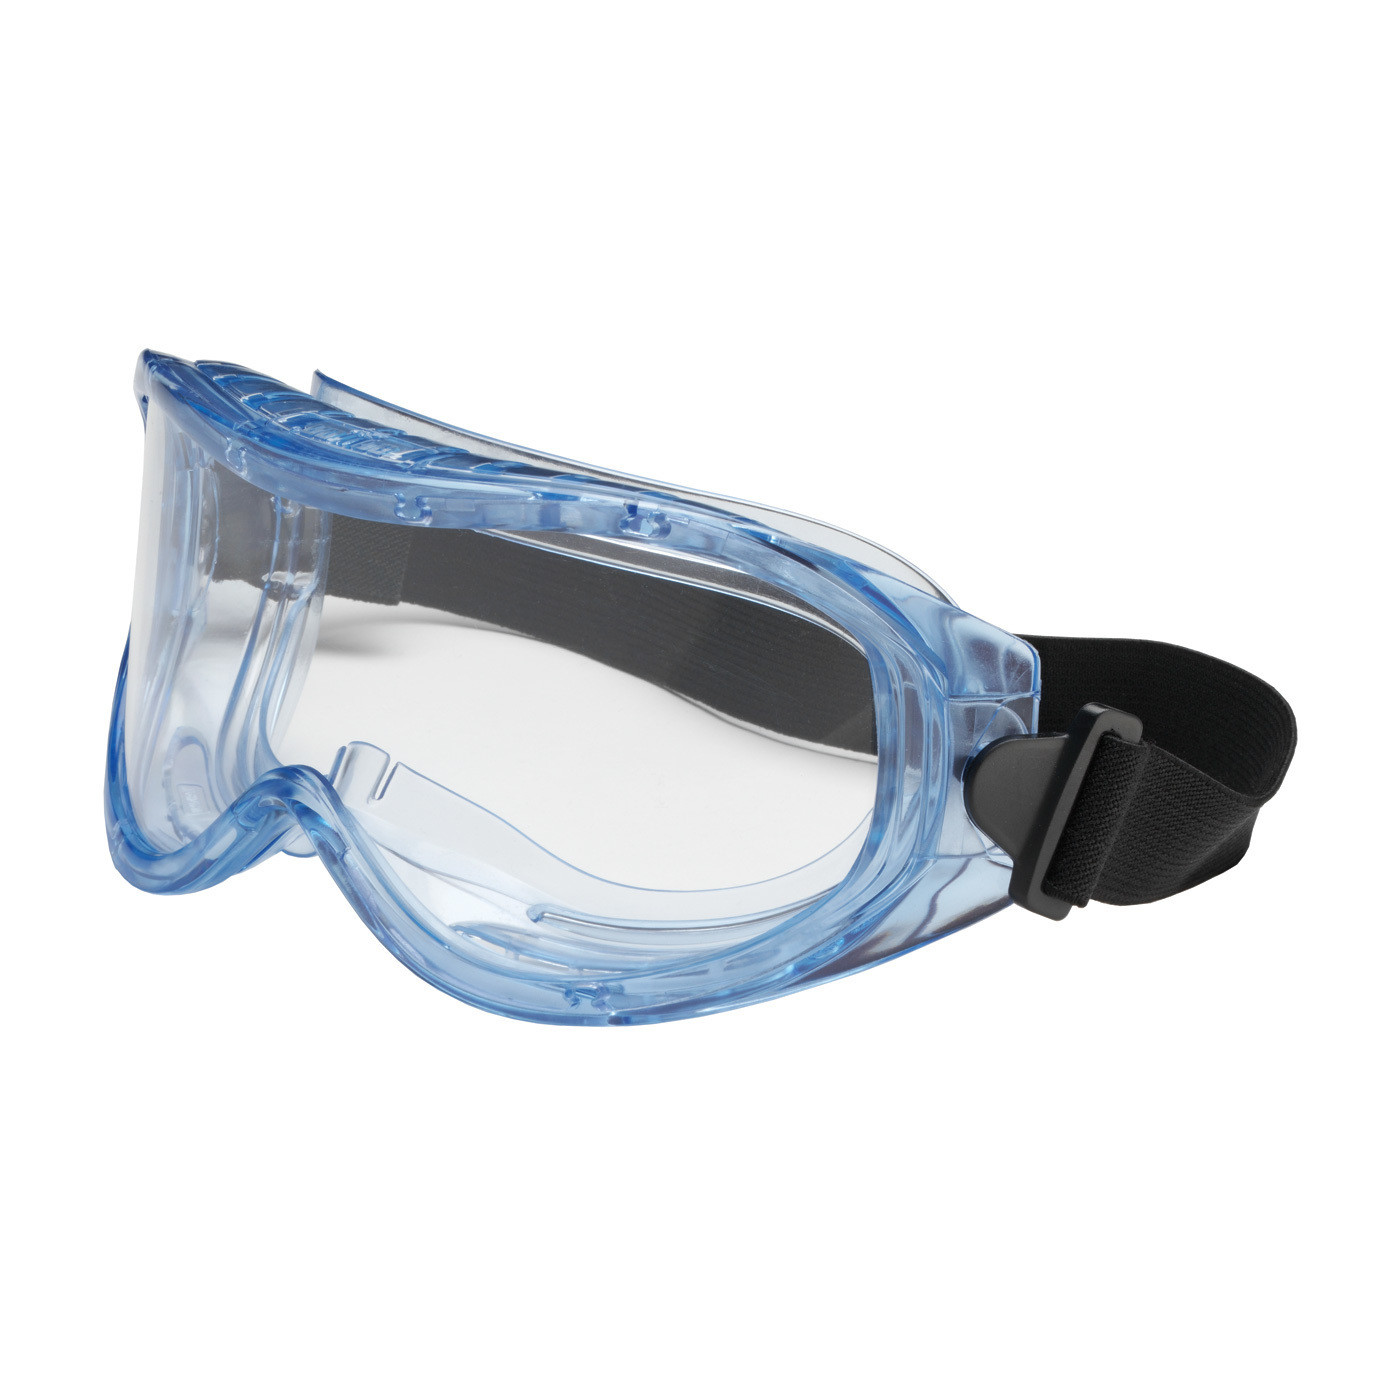 Indirect Vent Goggle Clear Lens And Anti Scratch Anti Fog Coating Meets Ansi Z87 1